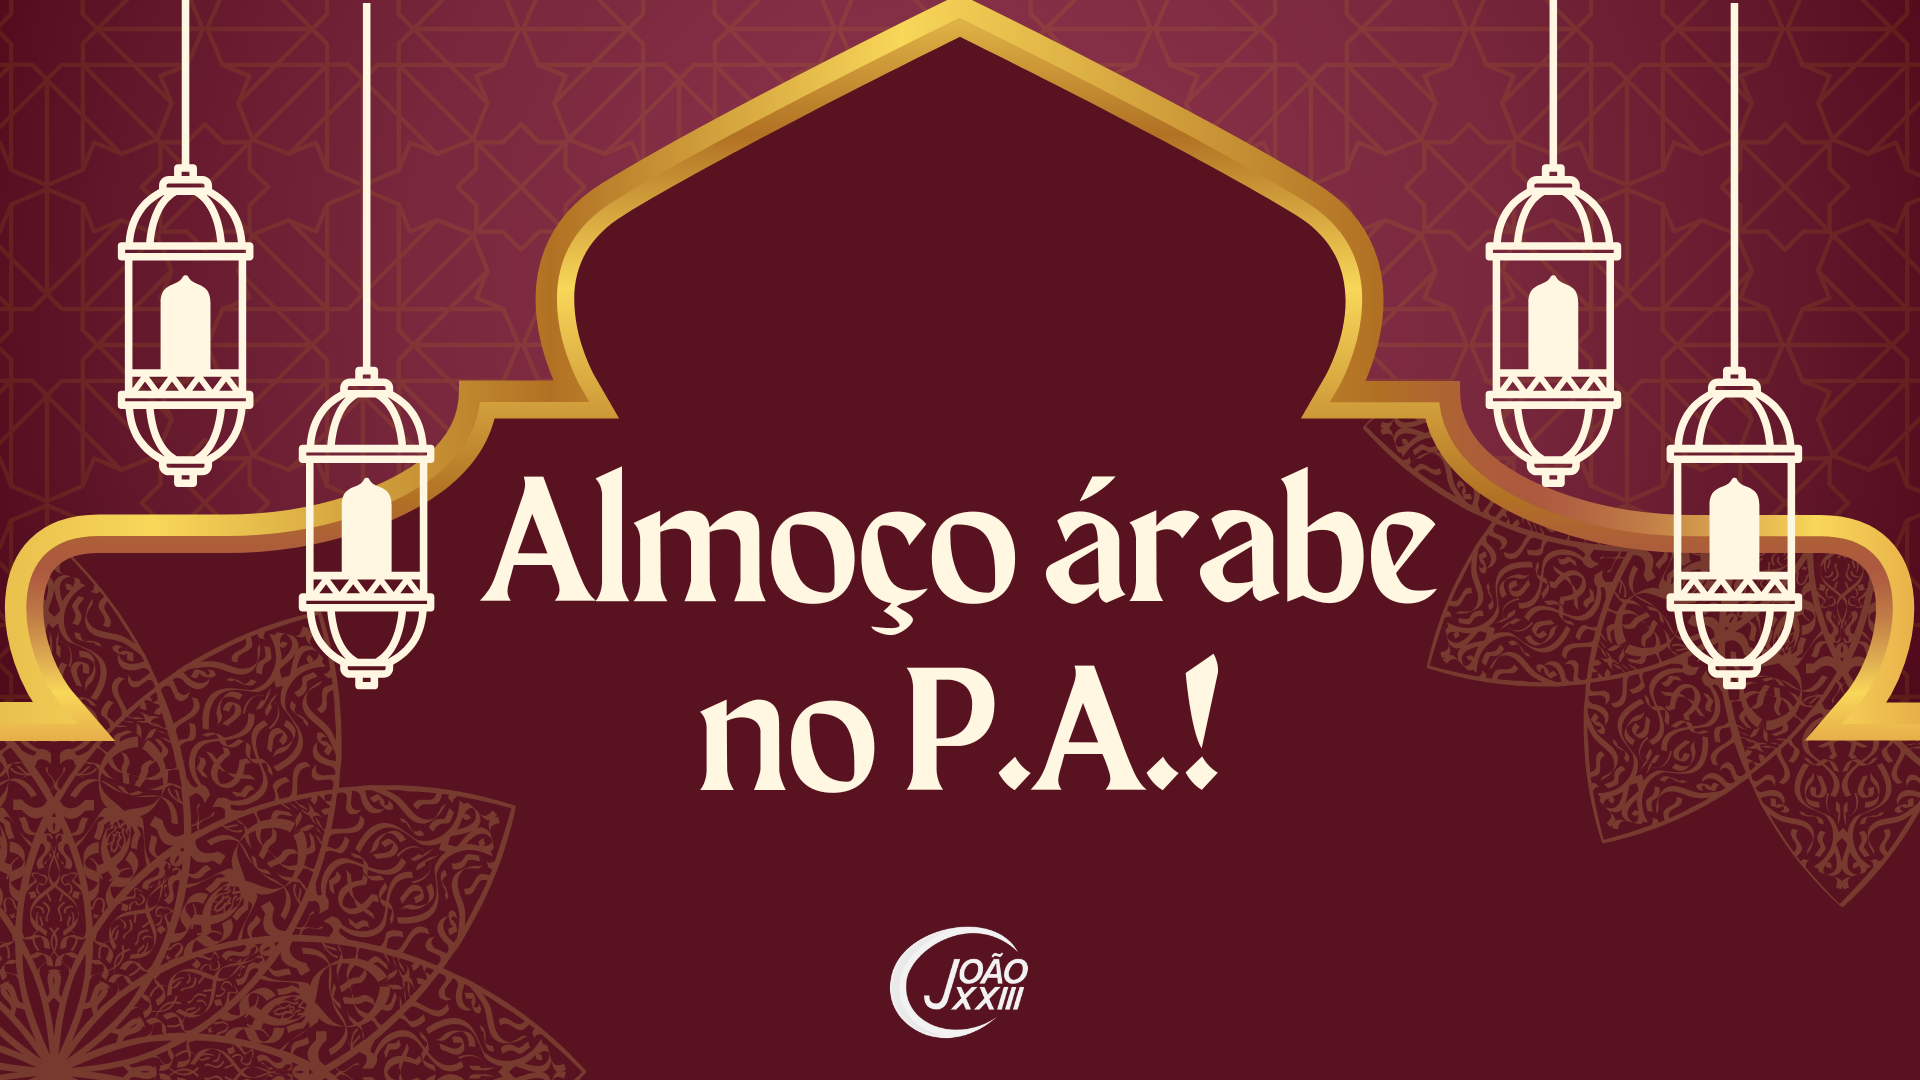 You are currently viewing Almoço árabe no P.A.!